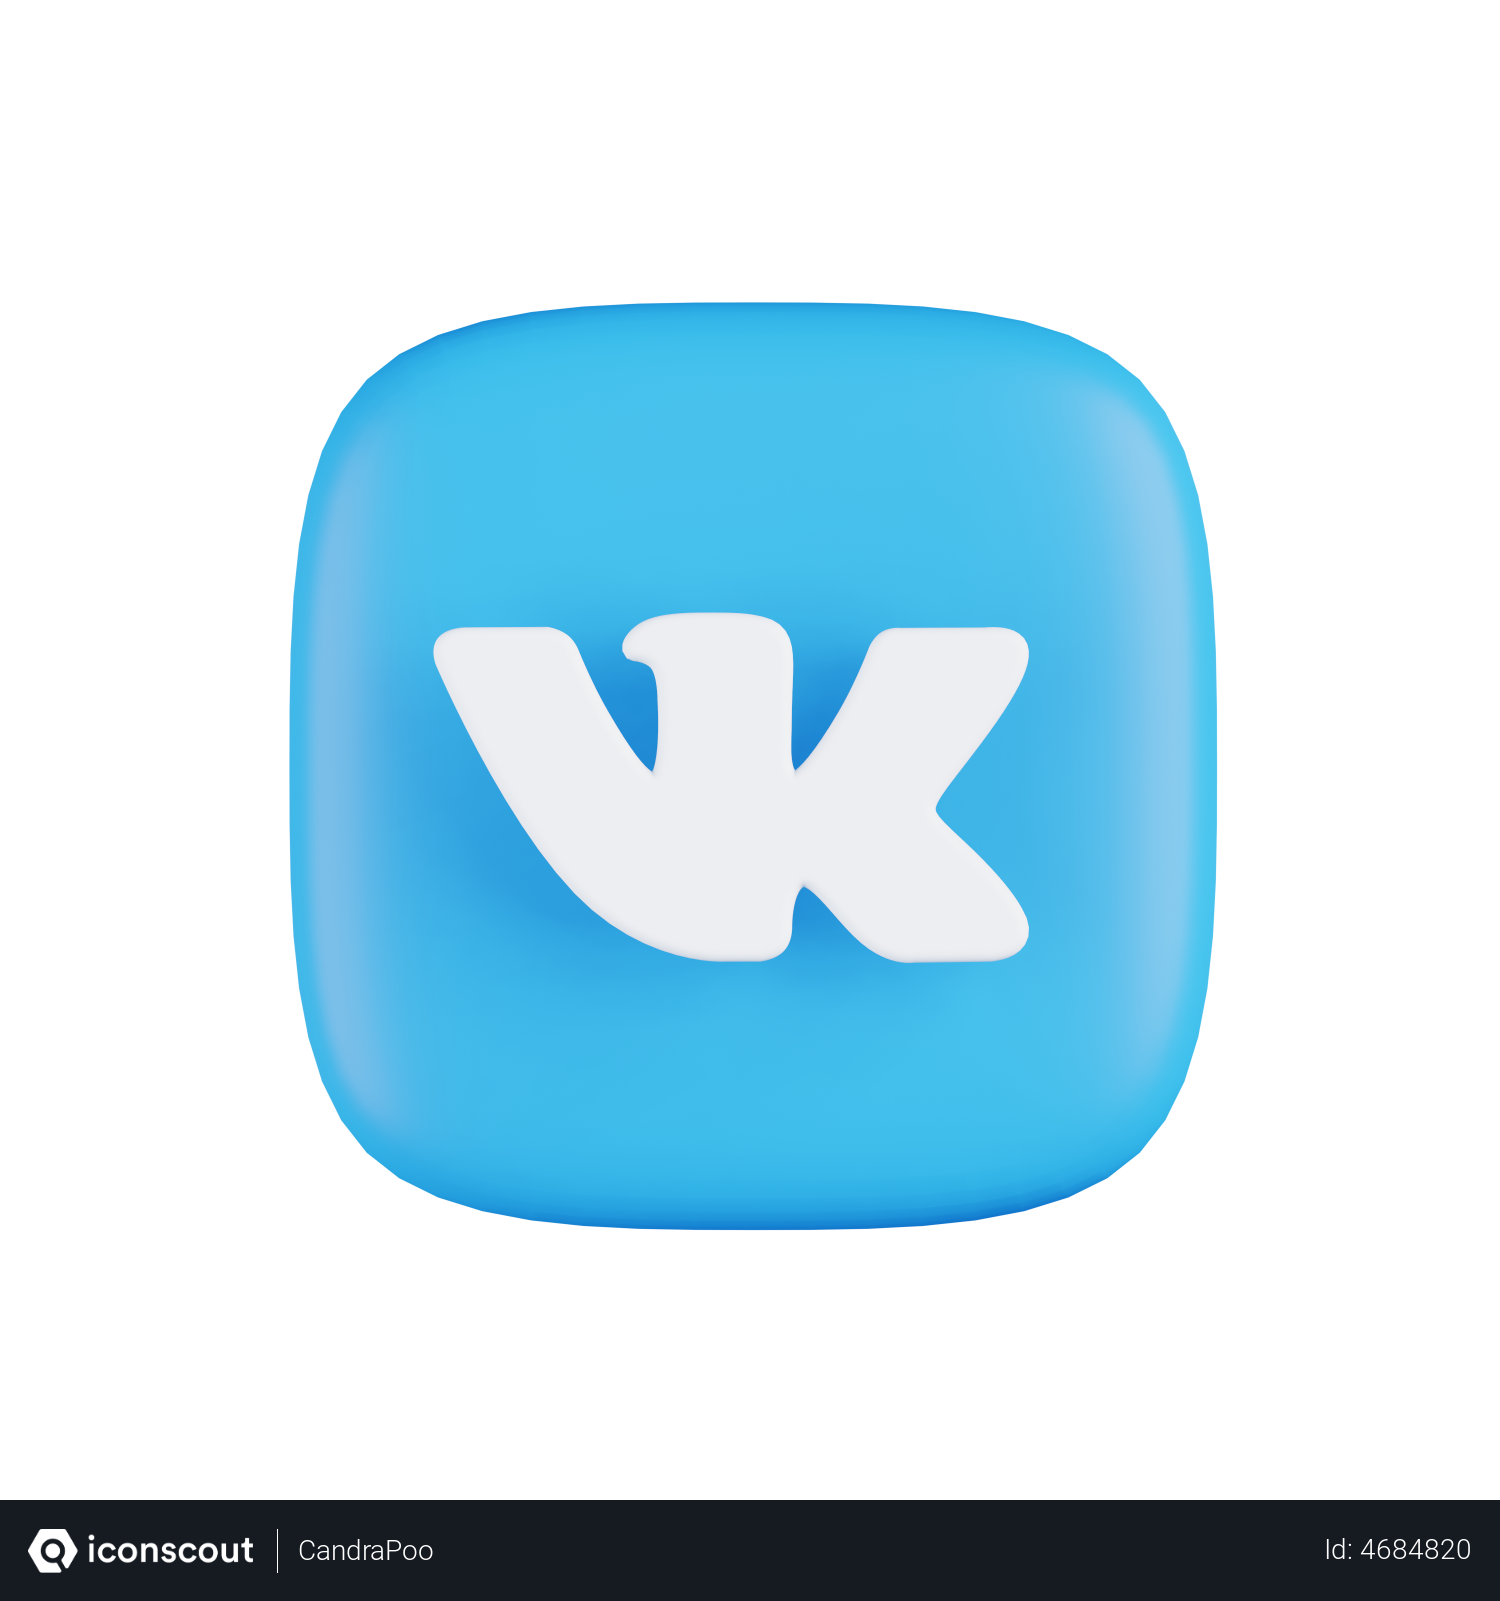 VK Logo and symbol, meaning, history, PNG, brand